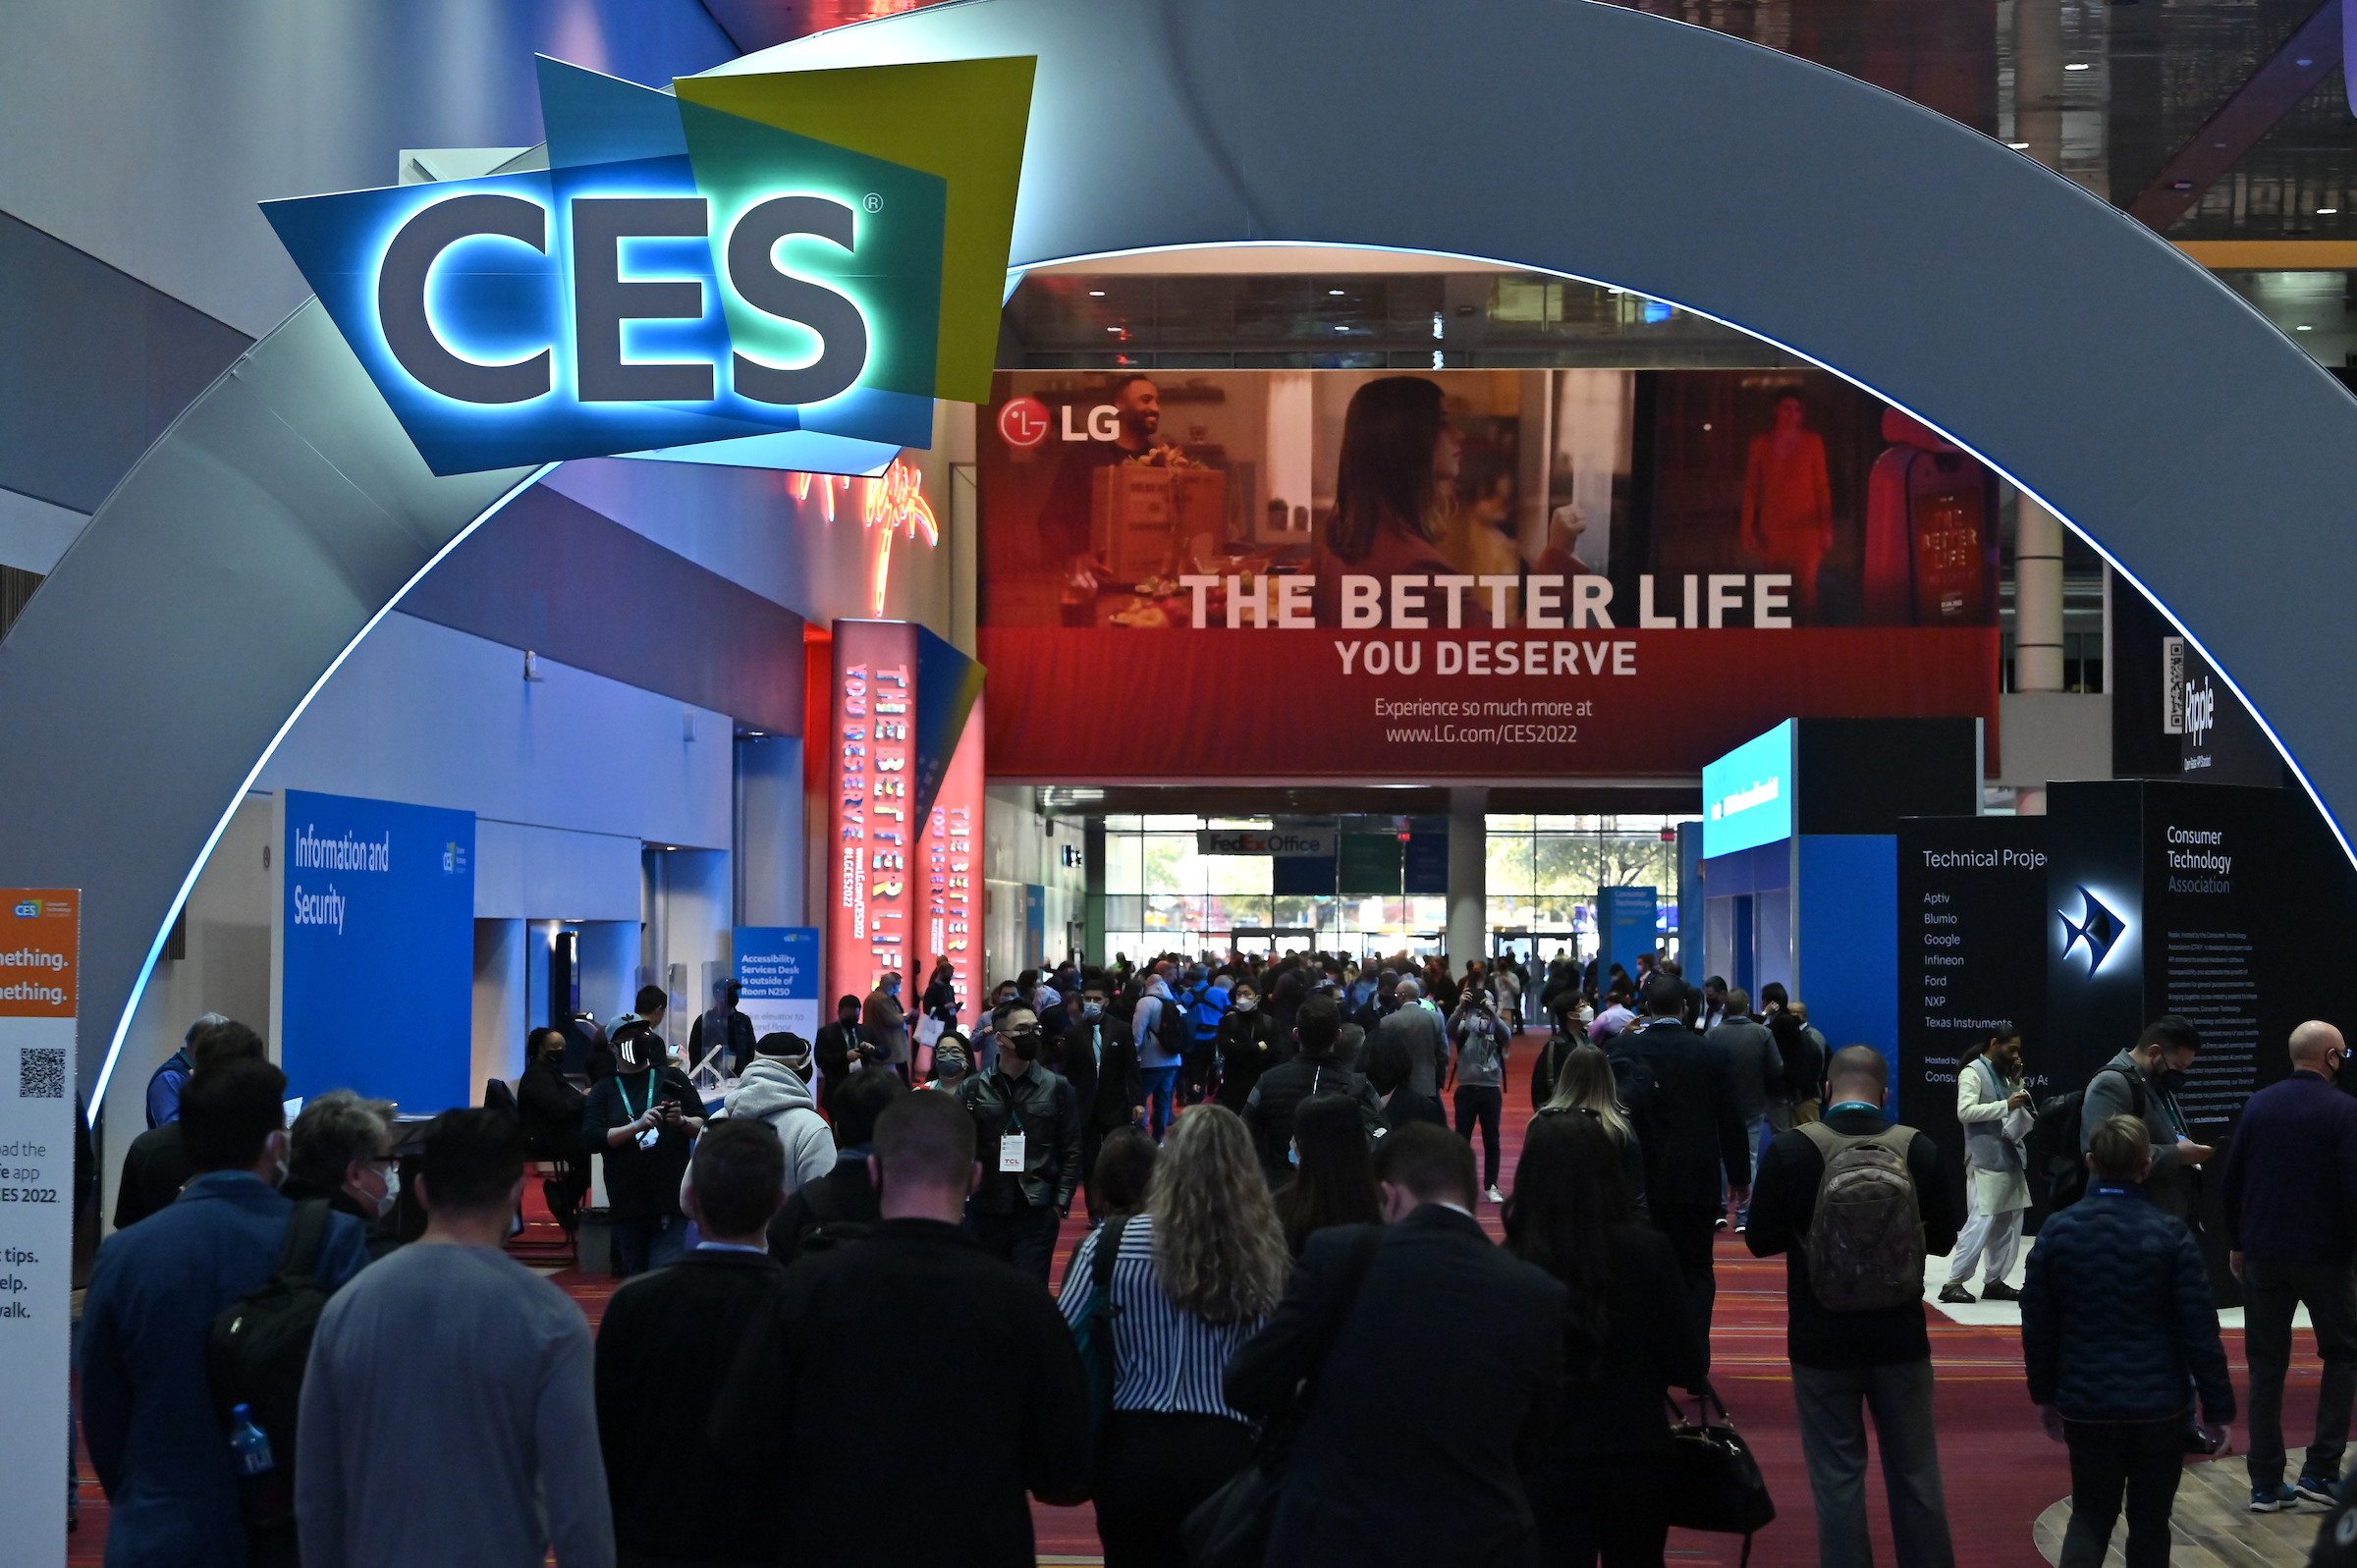 CES 2023 conference hall with logo and people entering show